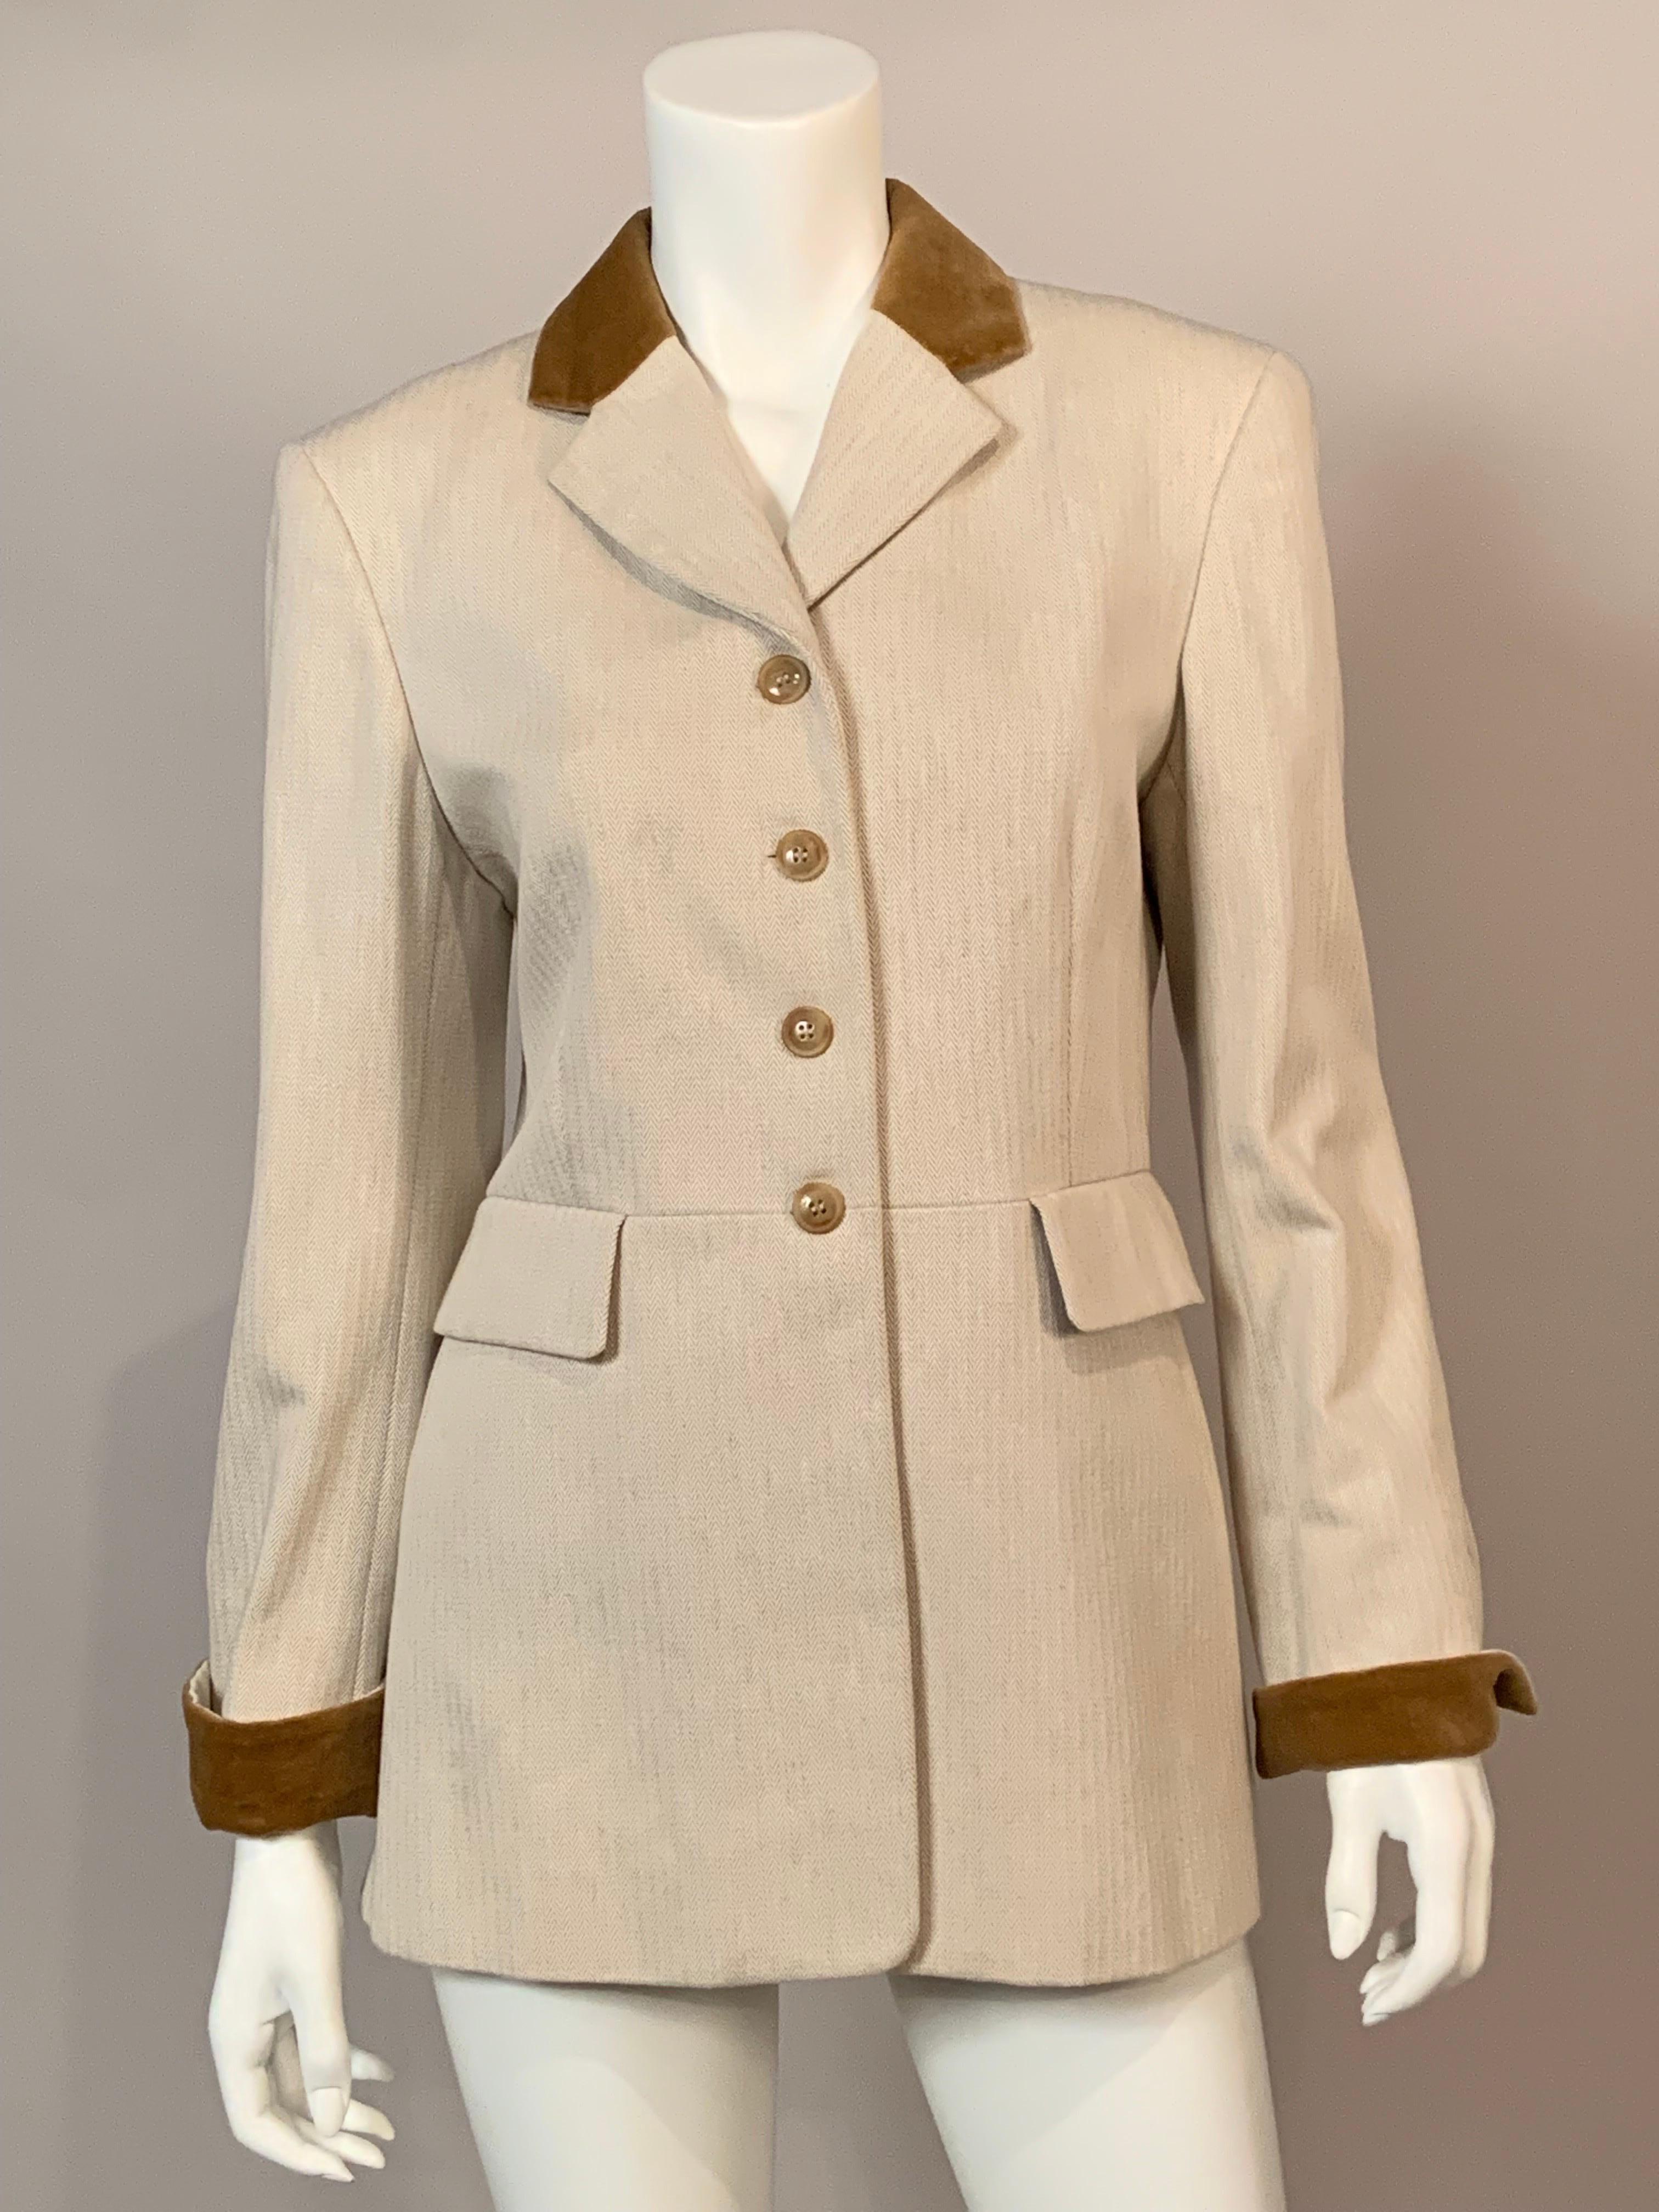 This Hermes jacket is designed in the classic equestrian riding jacket style.  The cream cotton herringbone is accented by a velvet collar, notched lapels, four button closure, two pockets and three button velvet cuffs. At the back there are two